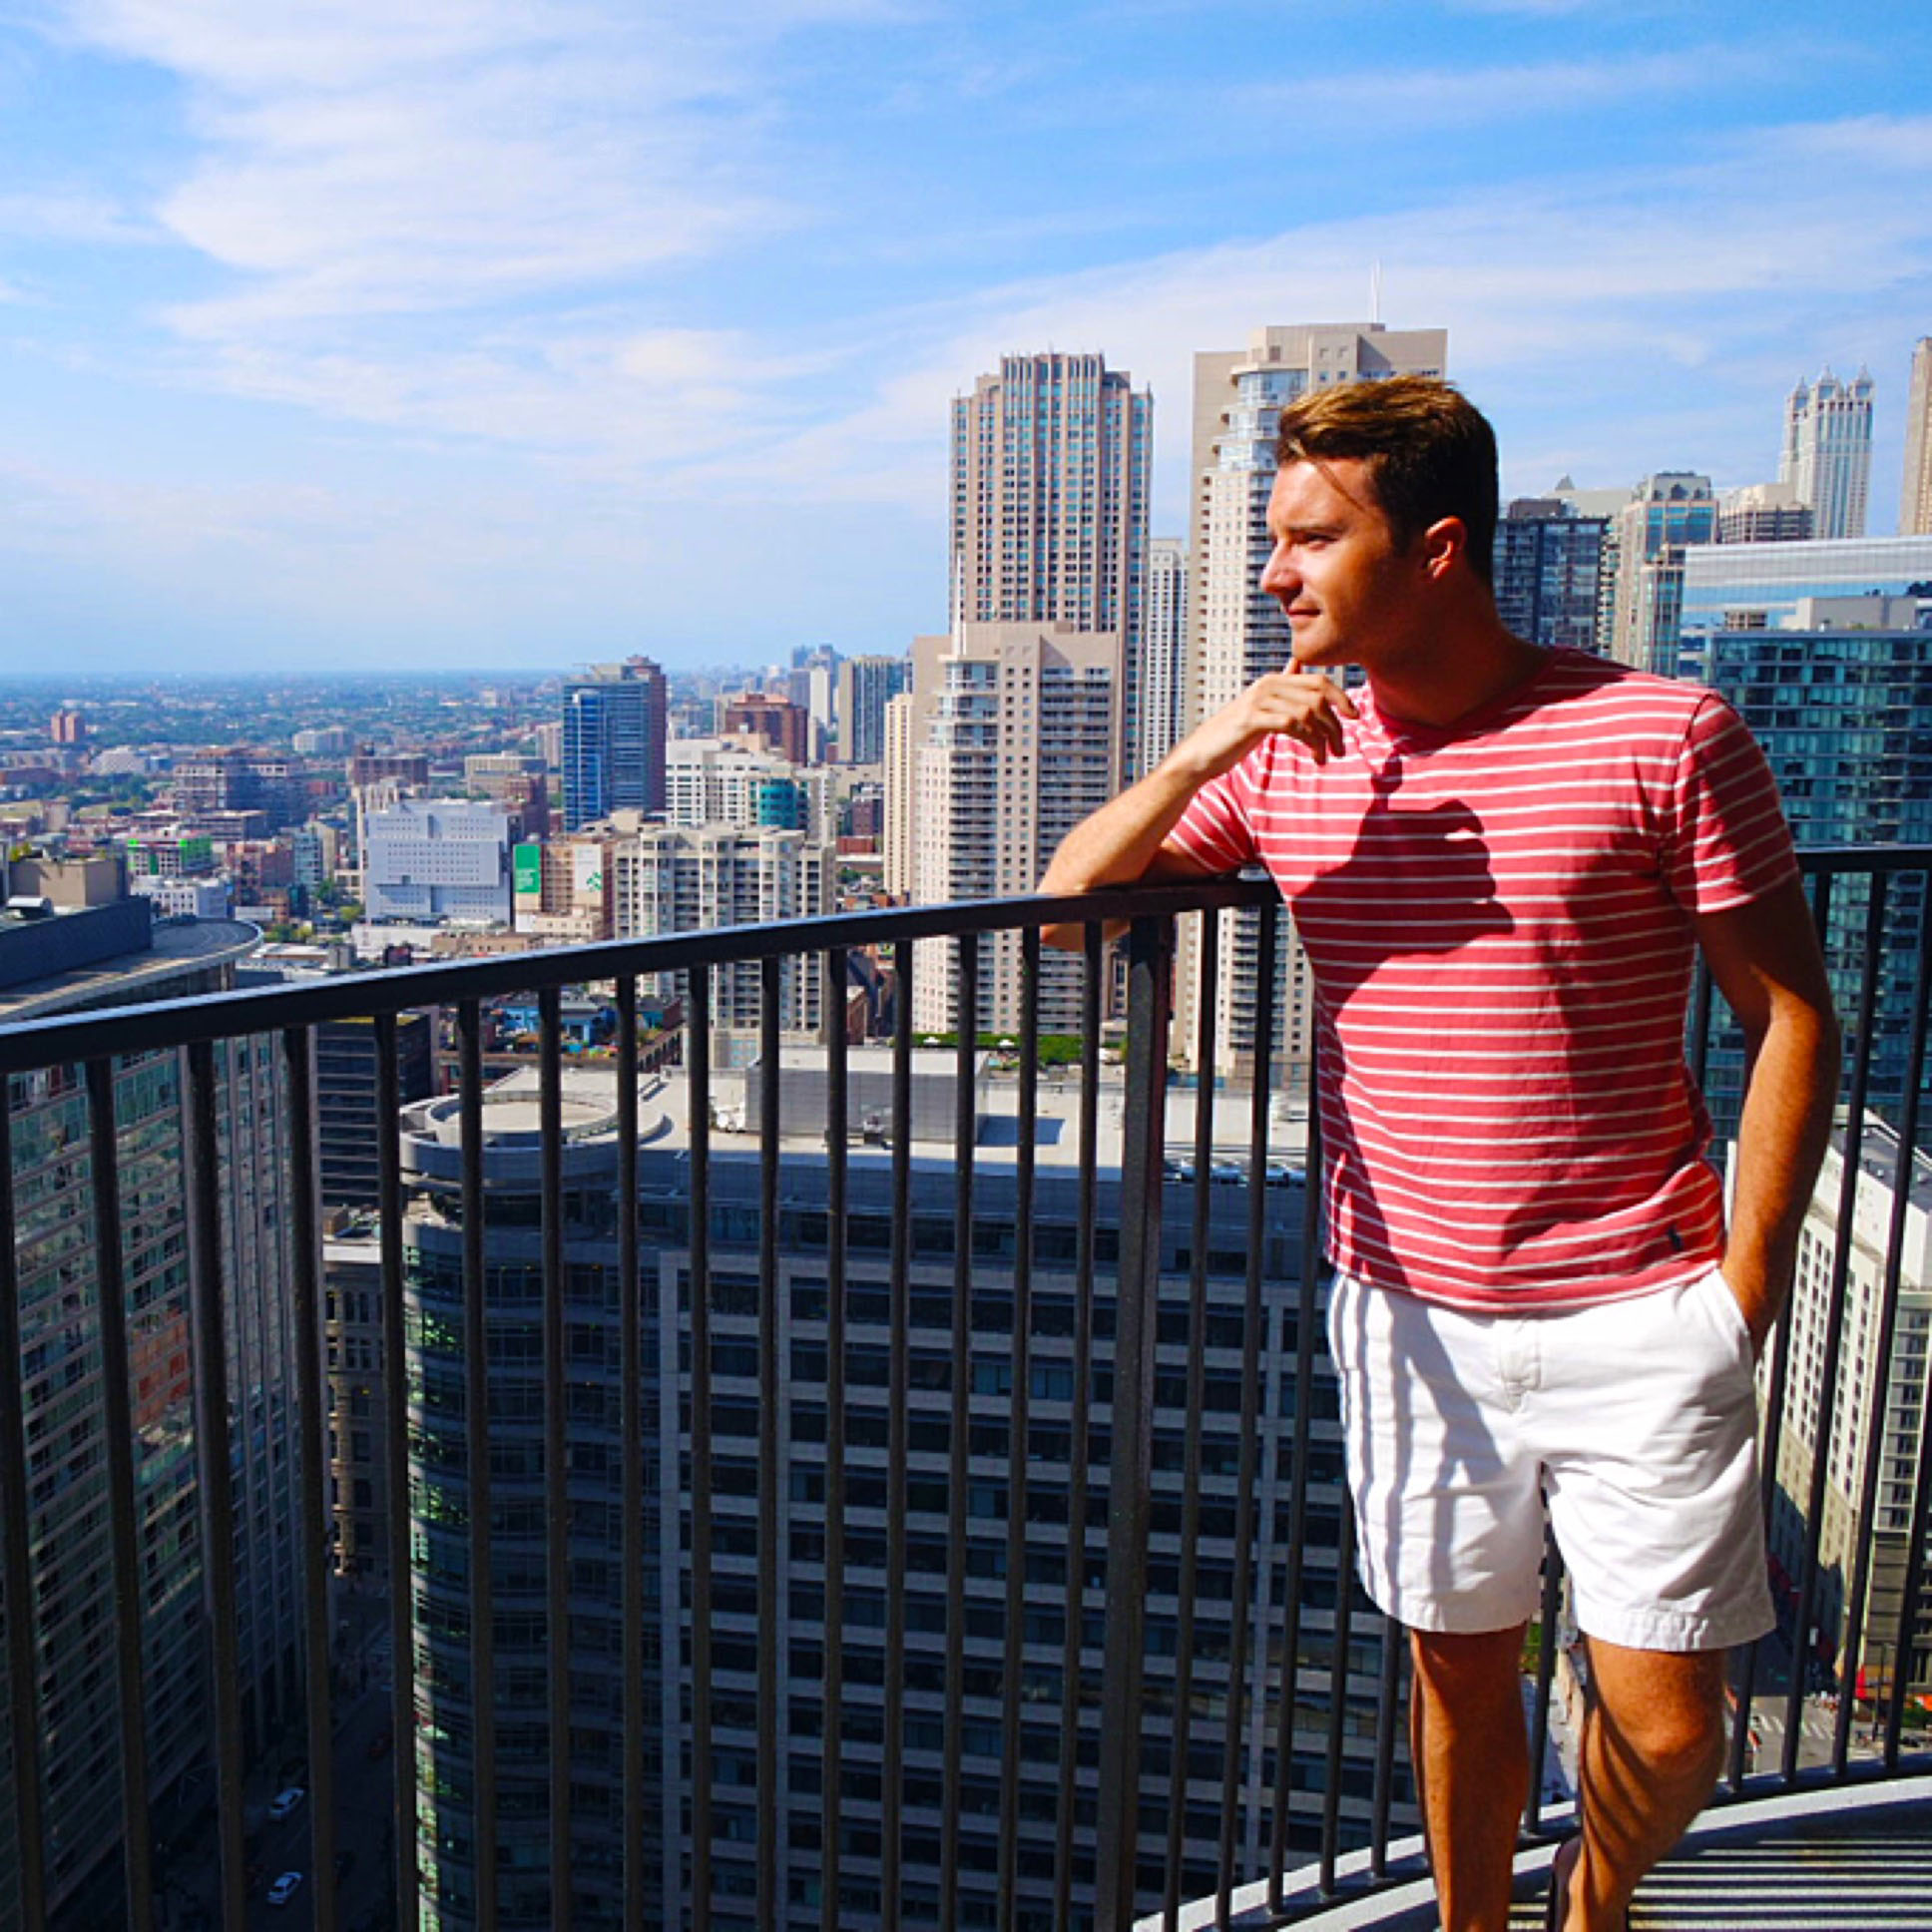 Hamptons to Hollywood - Travel Chicago Lifestyle by Kyle Langan